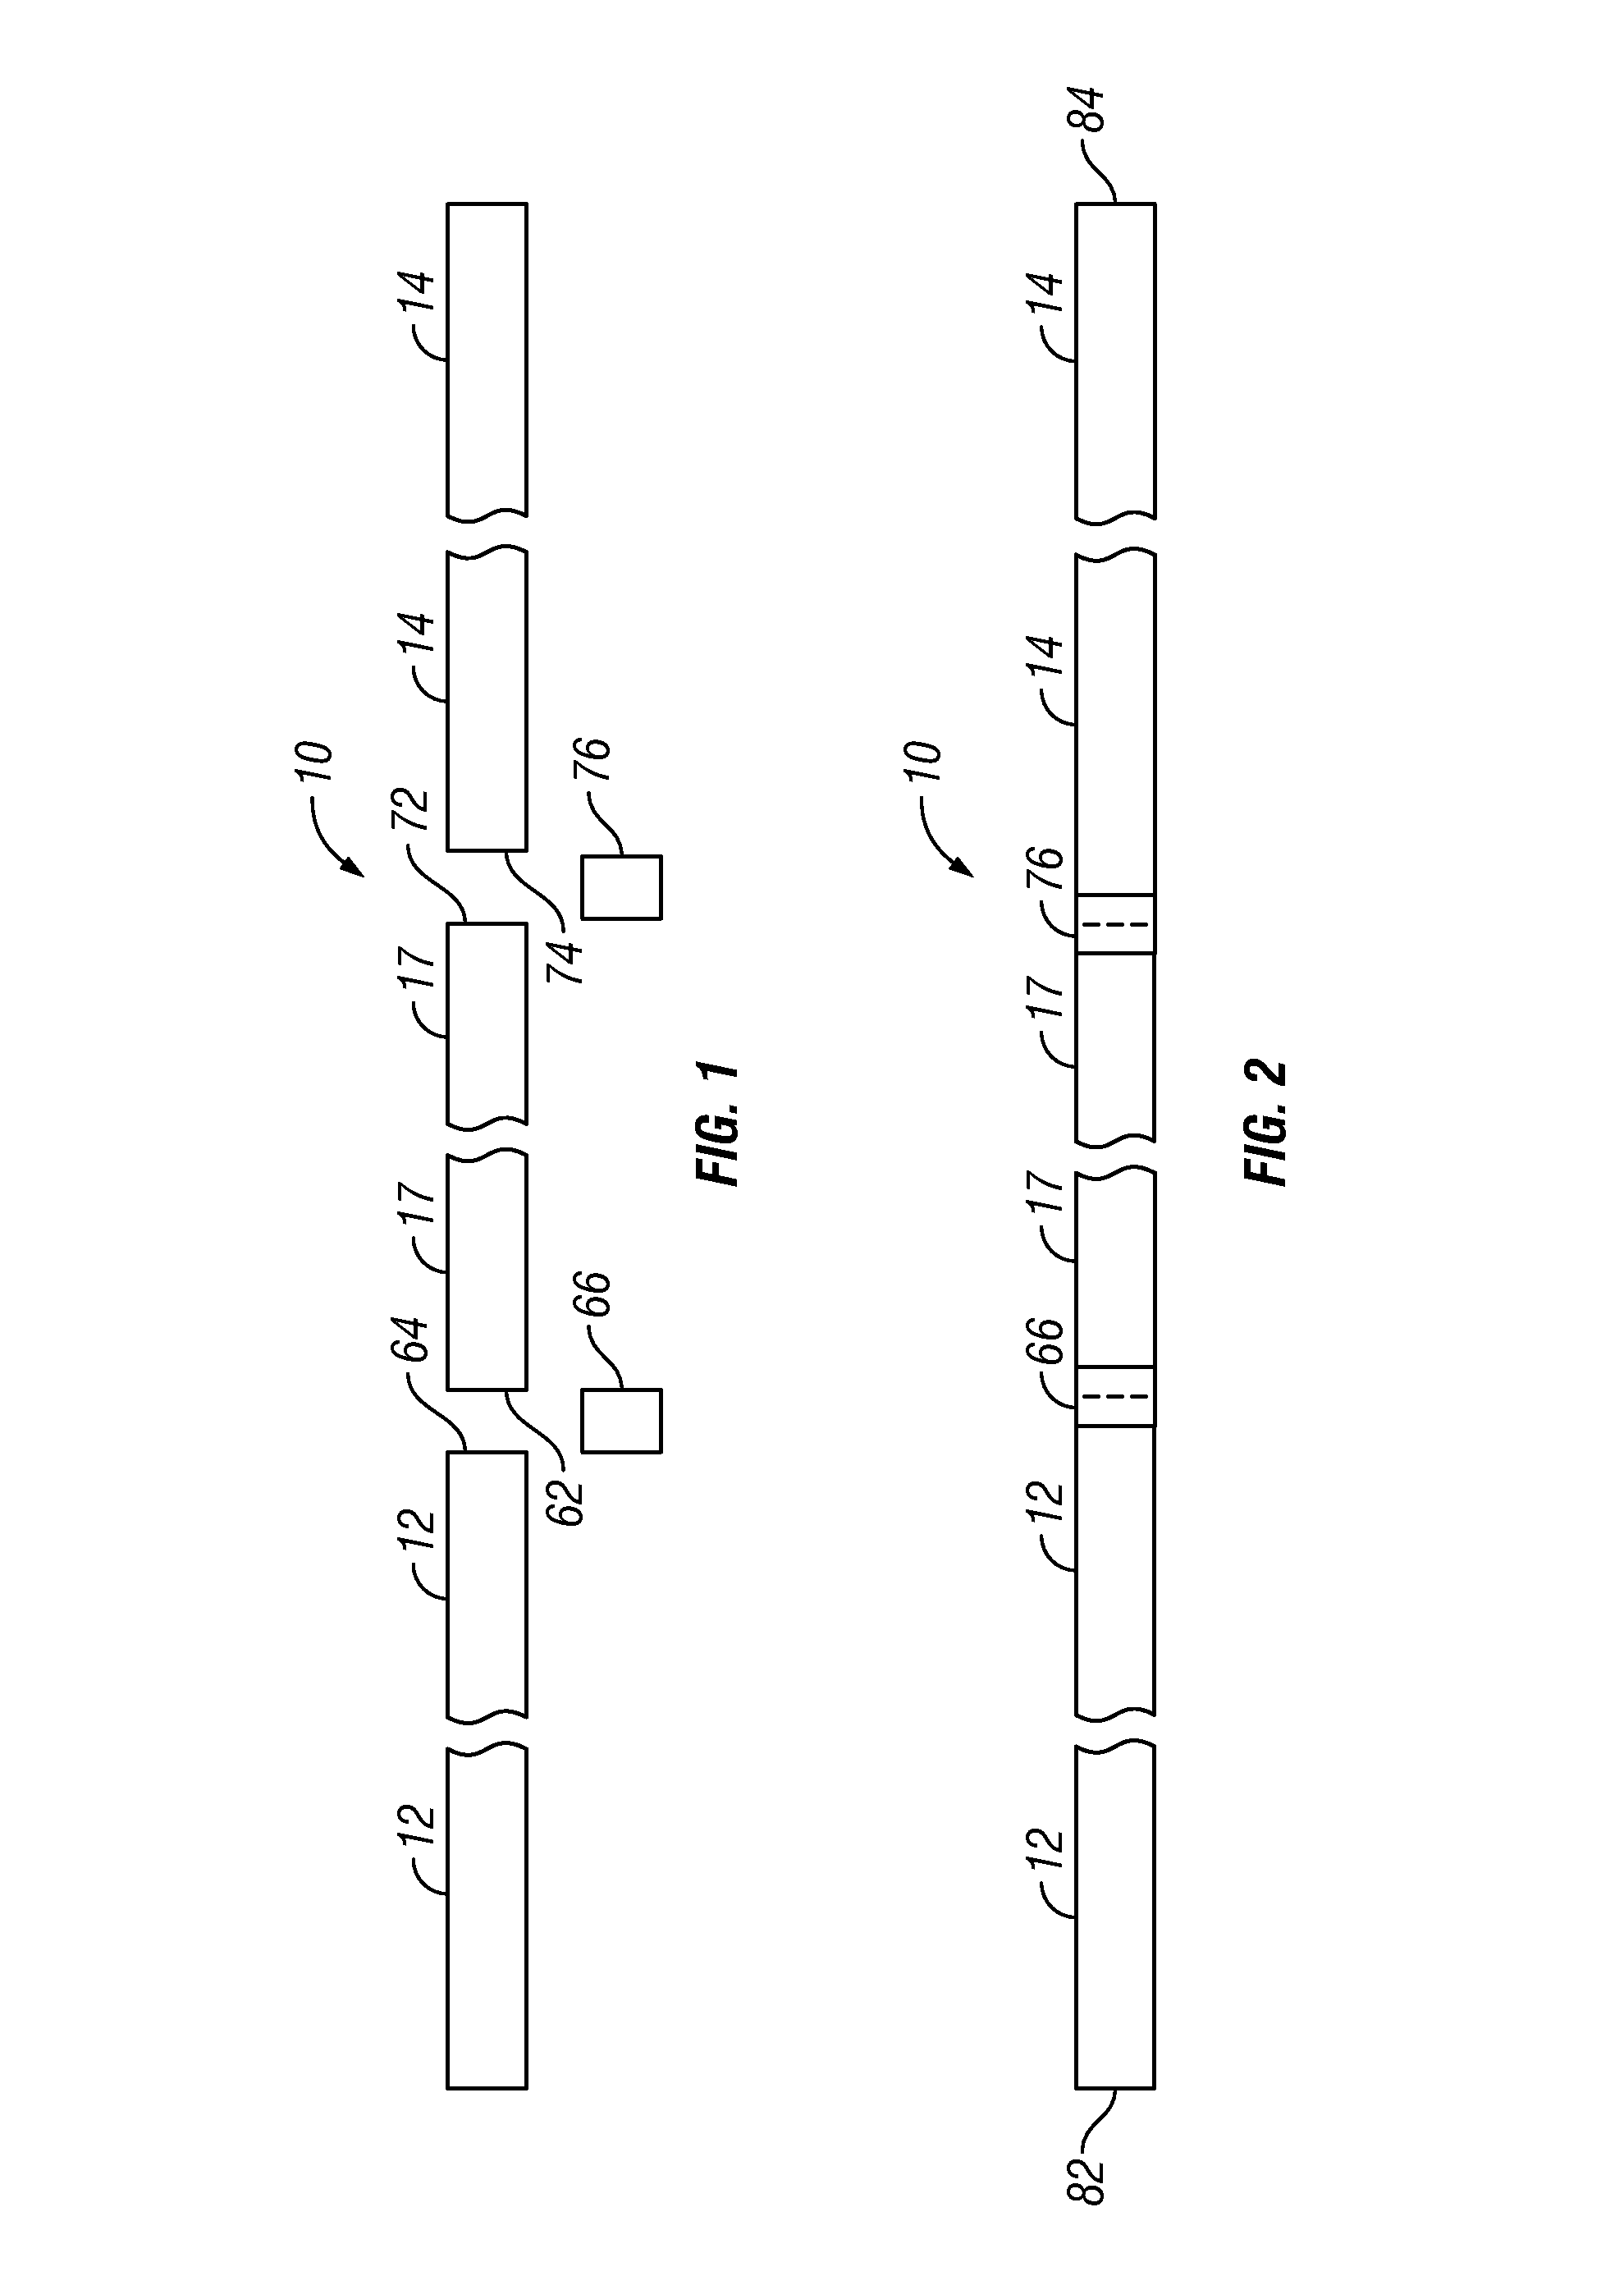 Self-contained magnetic tape drive and combined multi-part tape system